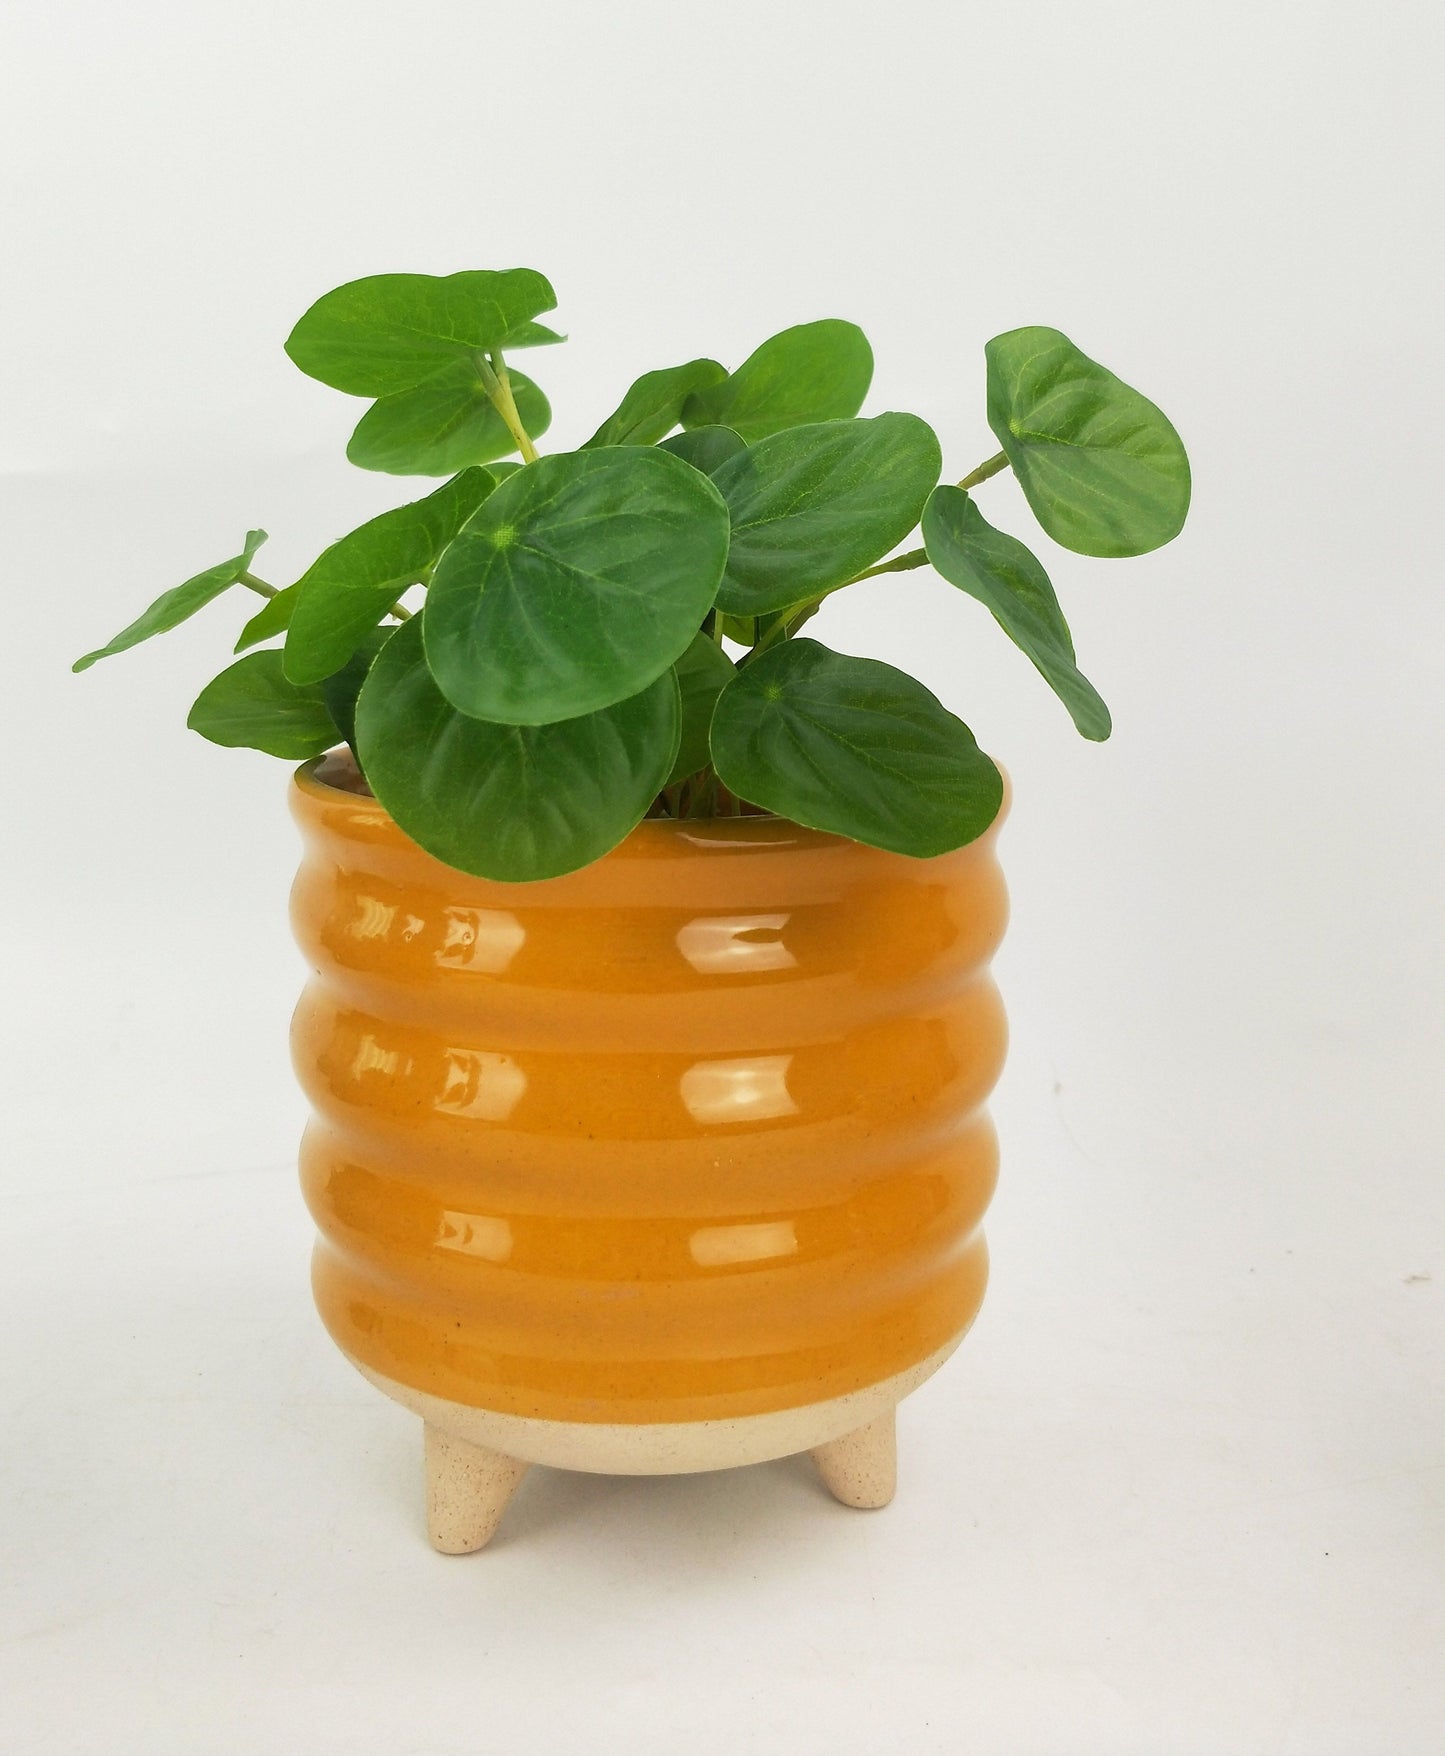 *SALE* Shelby Planter with Legs Mustard